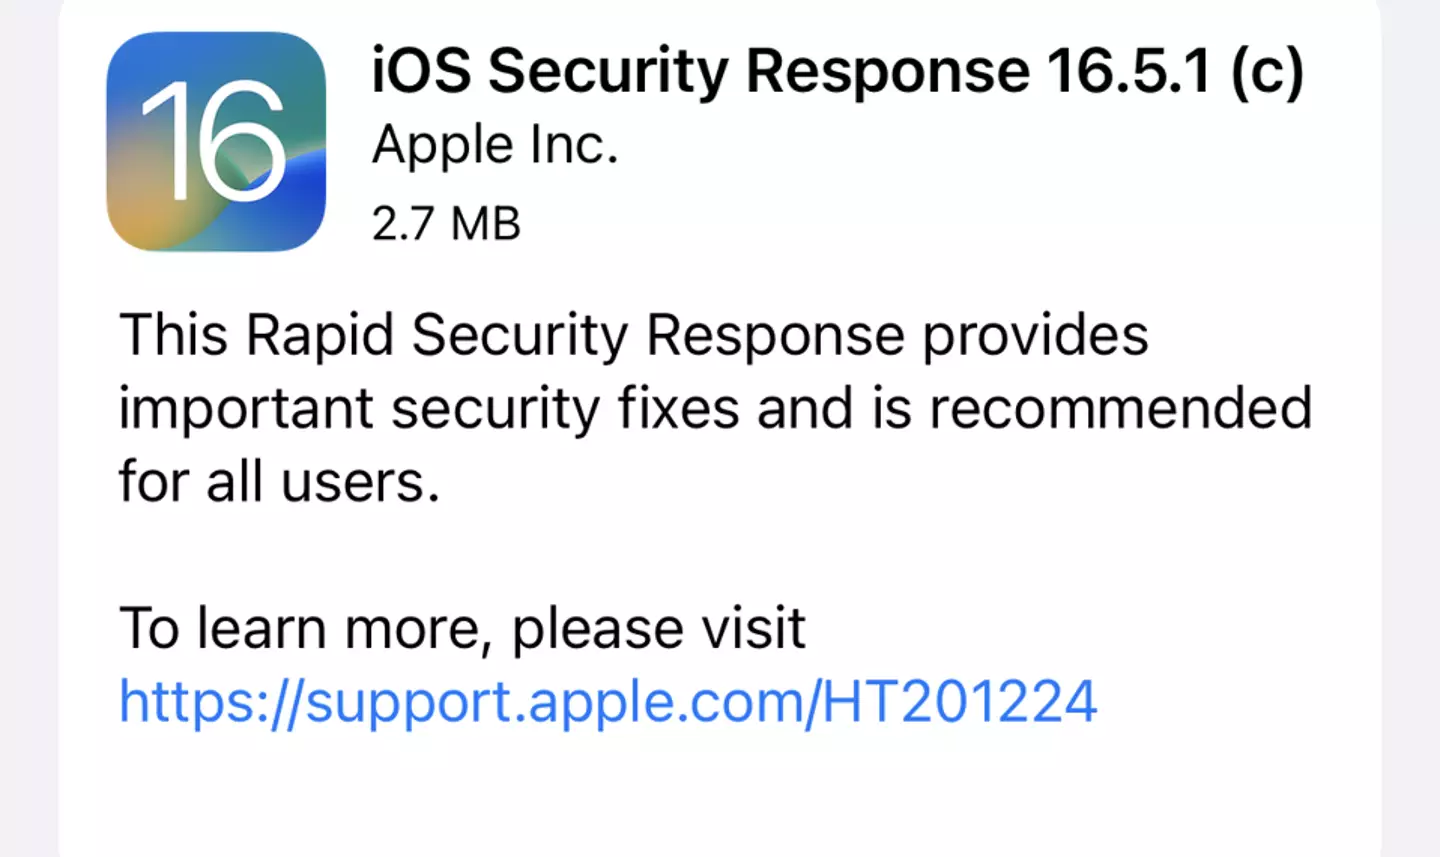 The latest update is the iOS 16.5.1 (c).